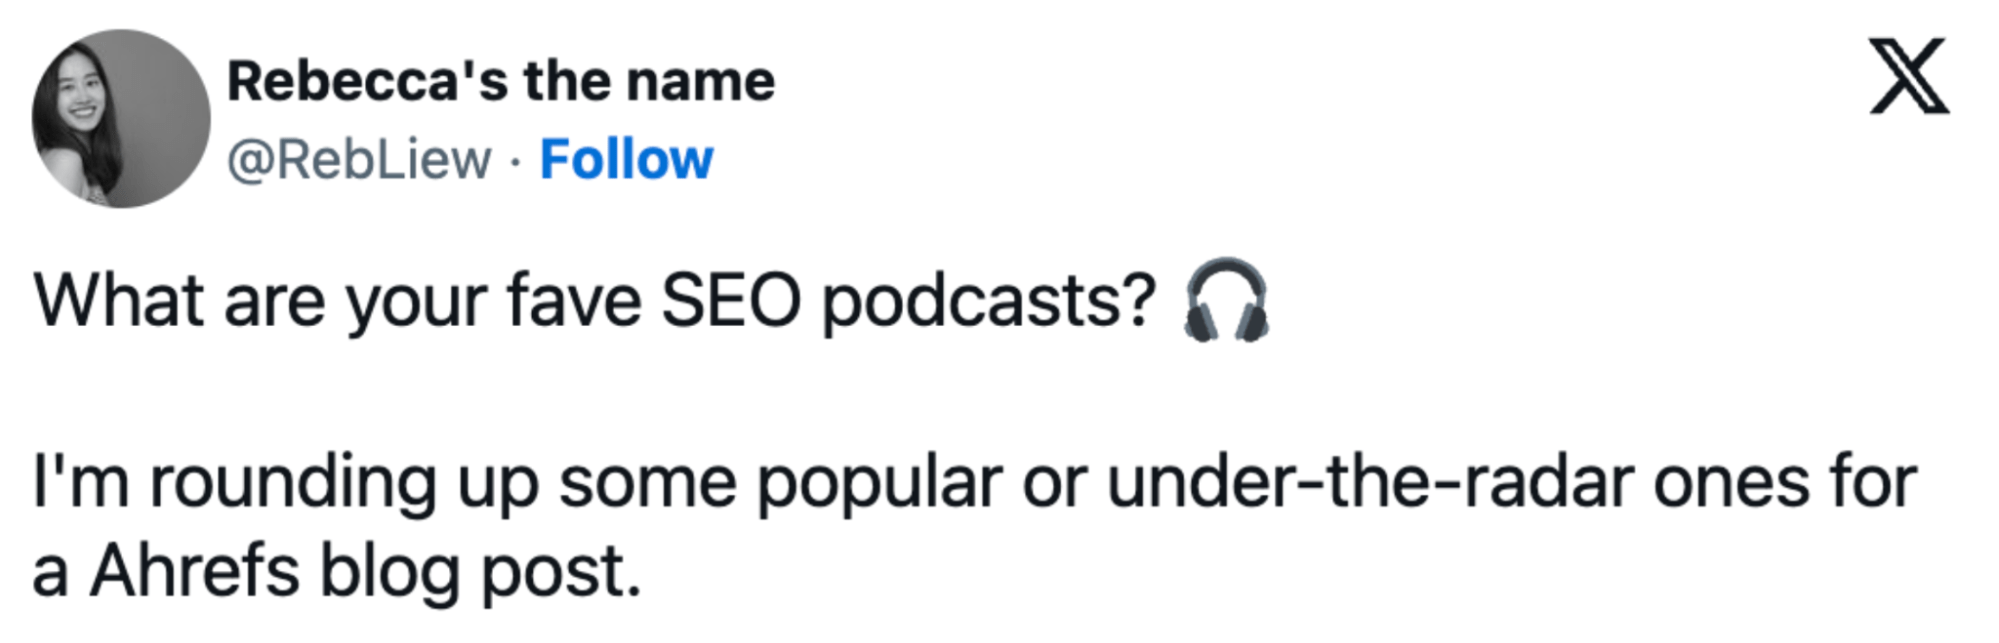 Rebecca's tweet asking for suggestions on popular, under-the-radar podcasts